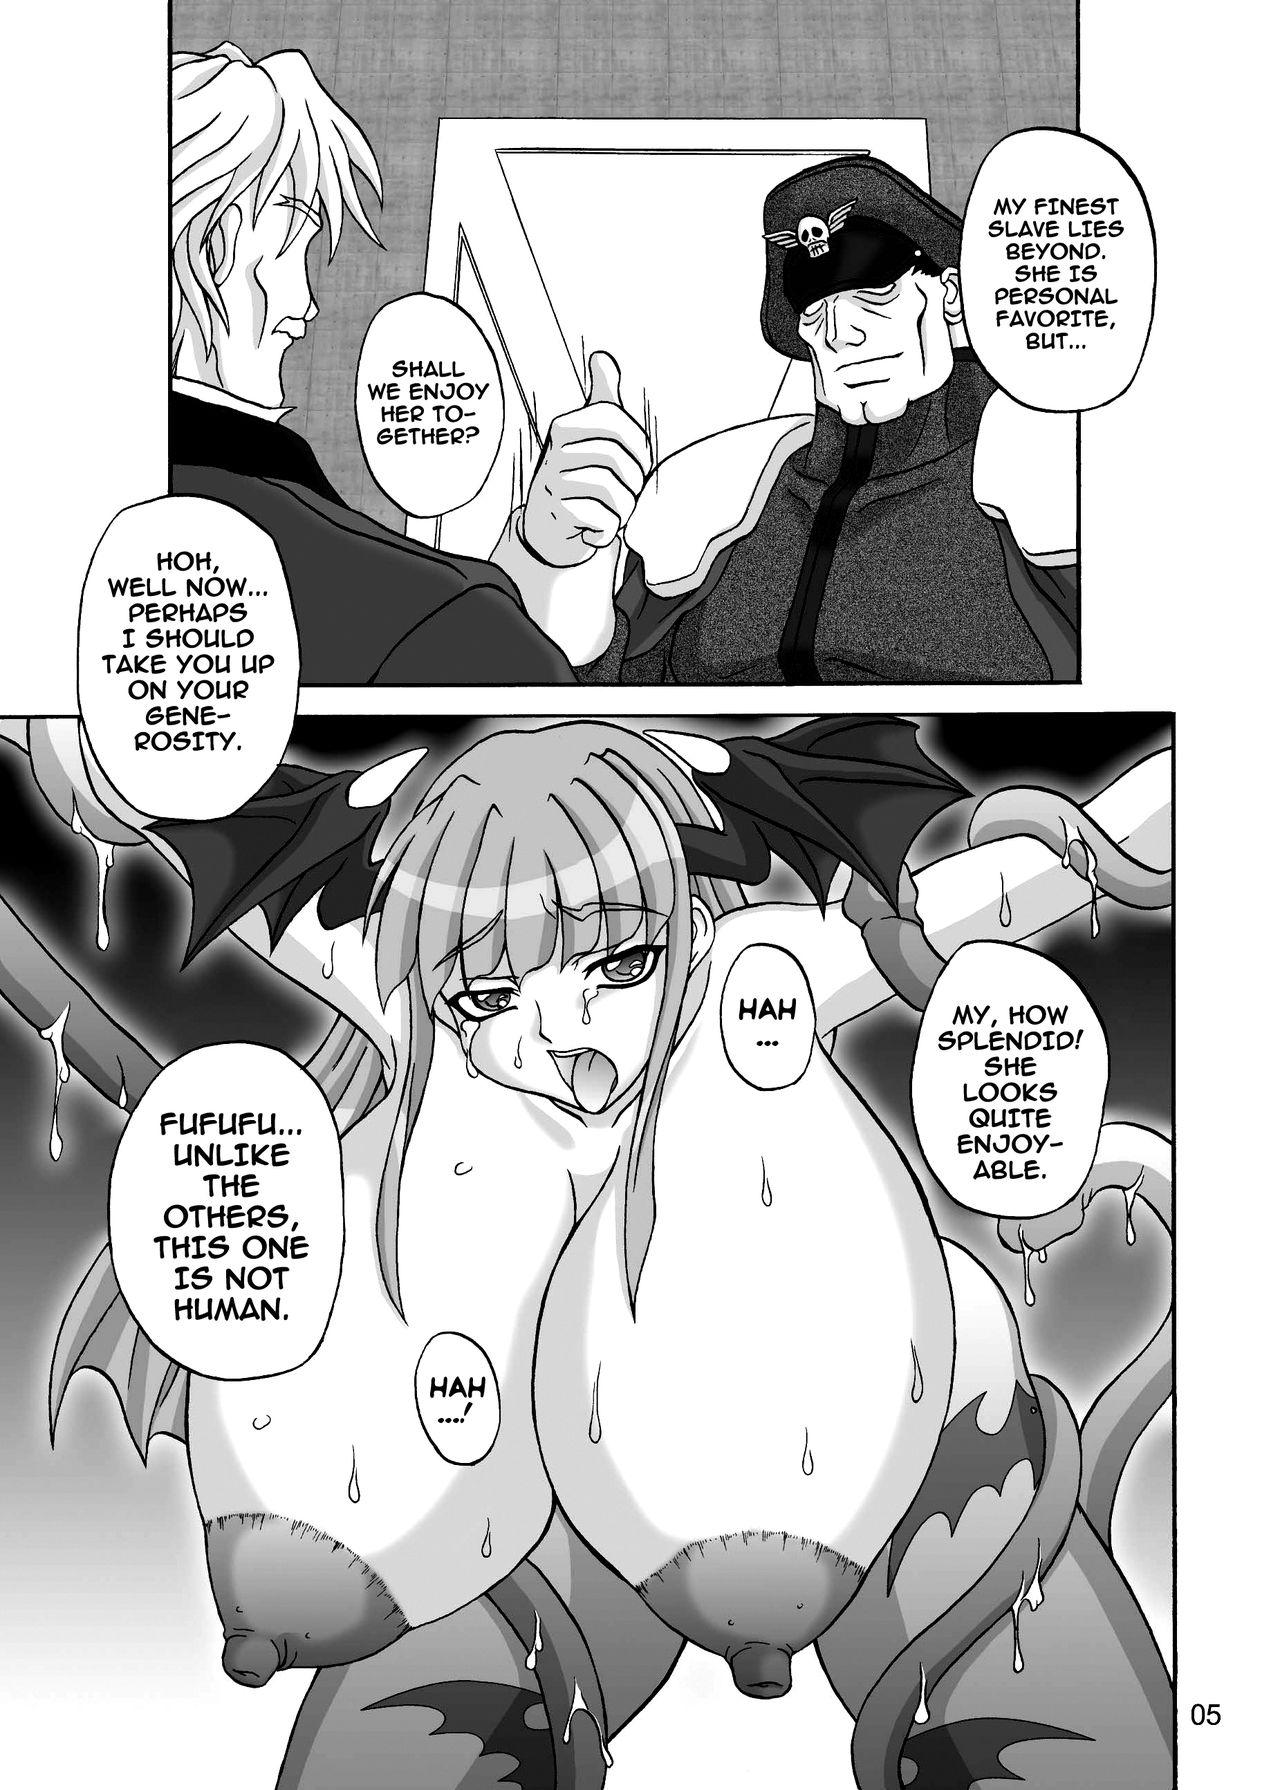 High Definition Insanity 2 - King of fighters Darkstalkers Masseuse - Page 4